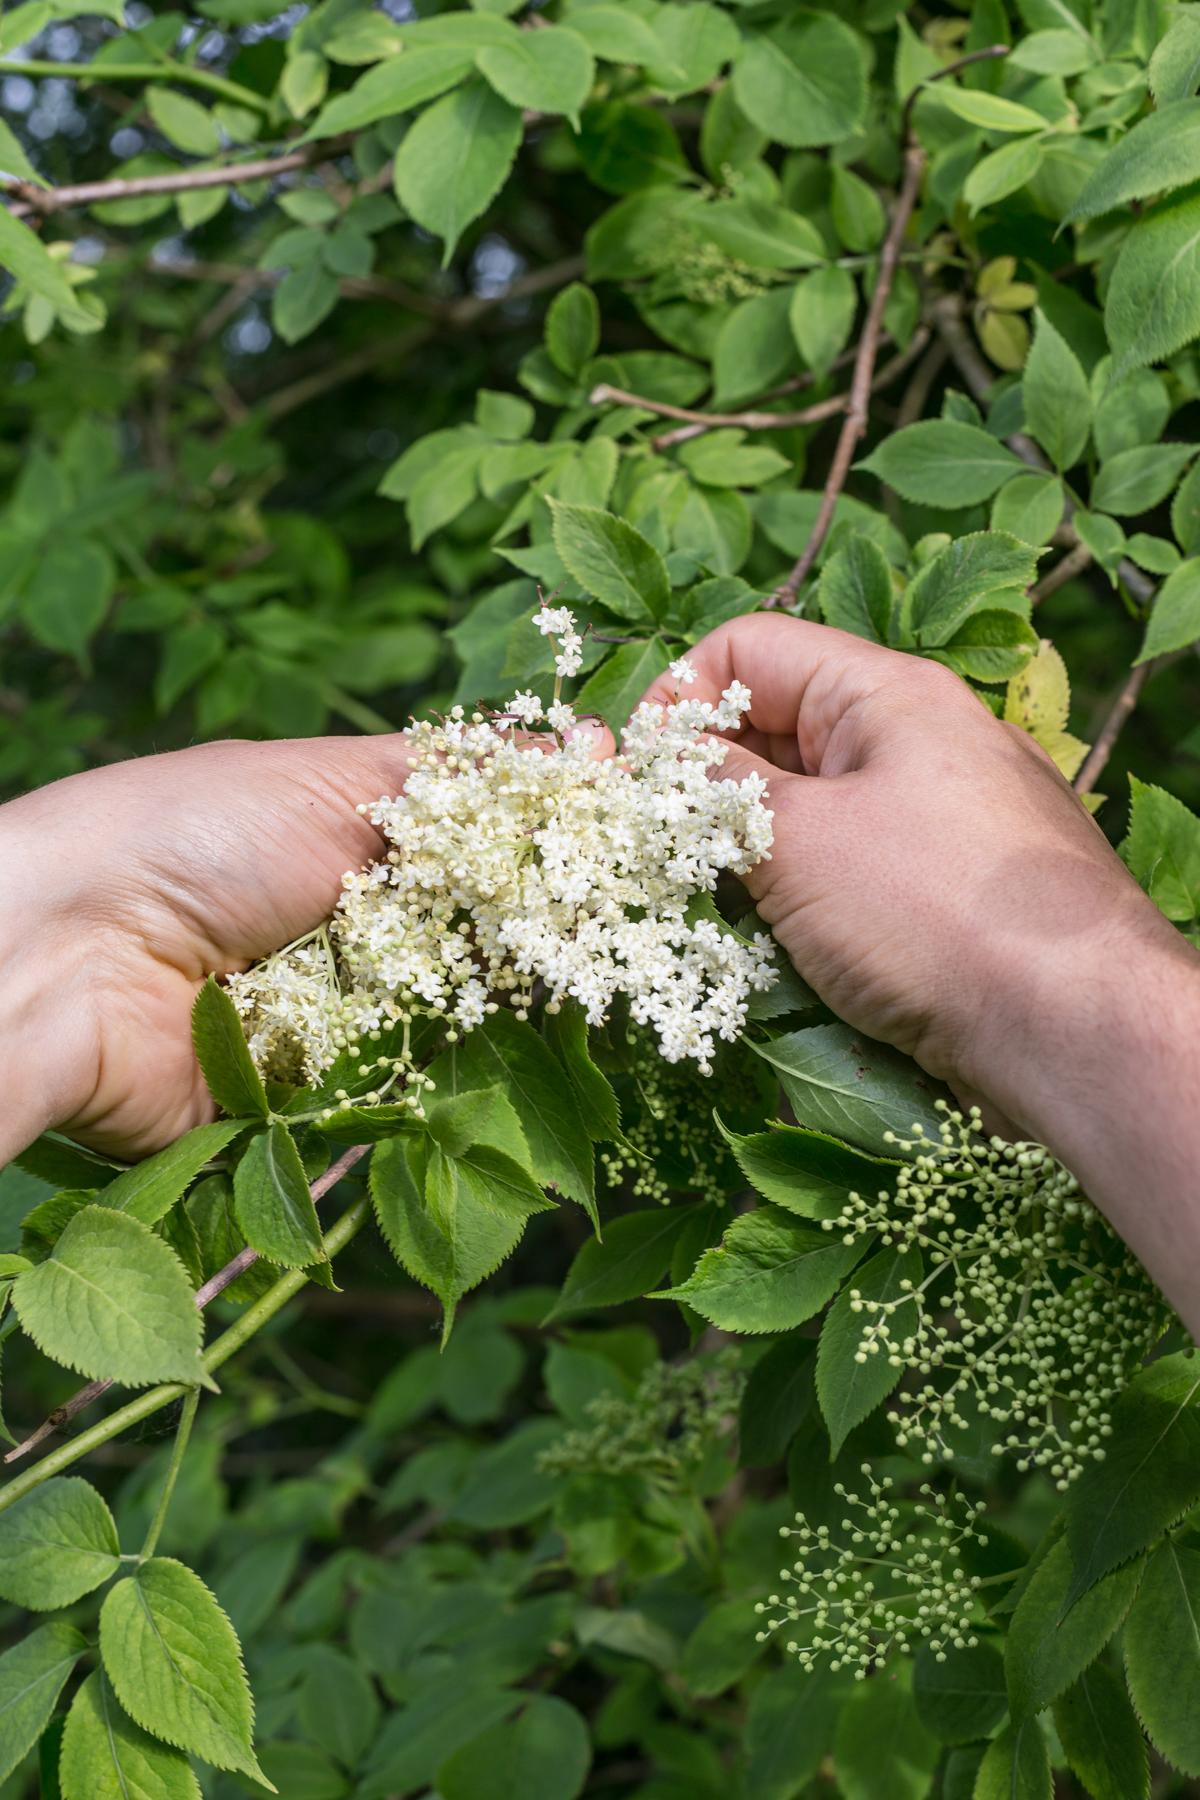 Parasol-shaped sprays of elderflowers punctuate and perfume the countryside come spring. (Photo by Giulia Scarpaleggia)